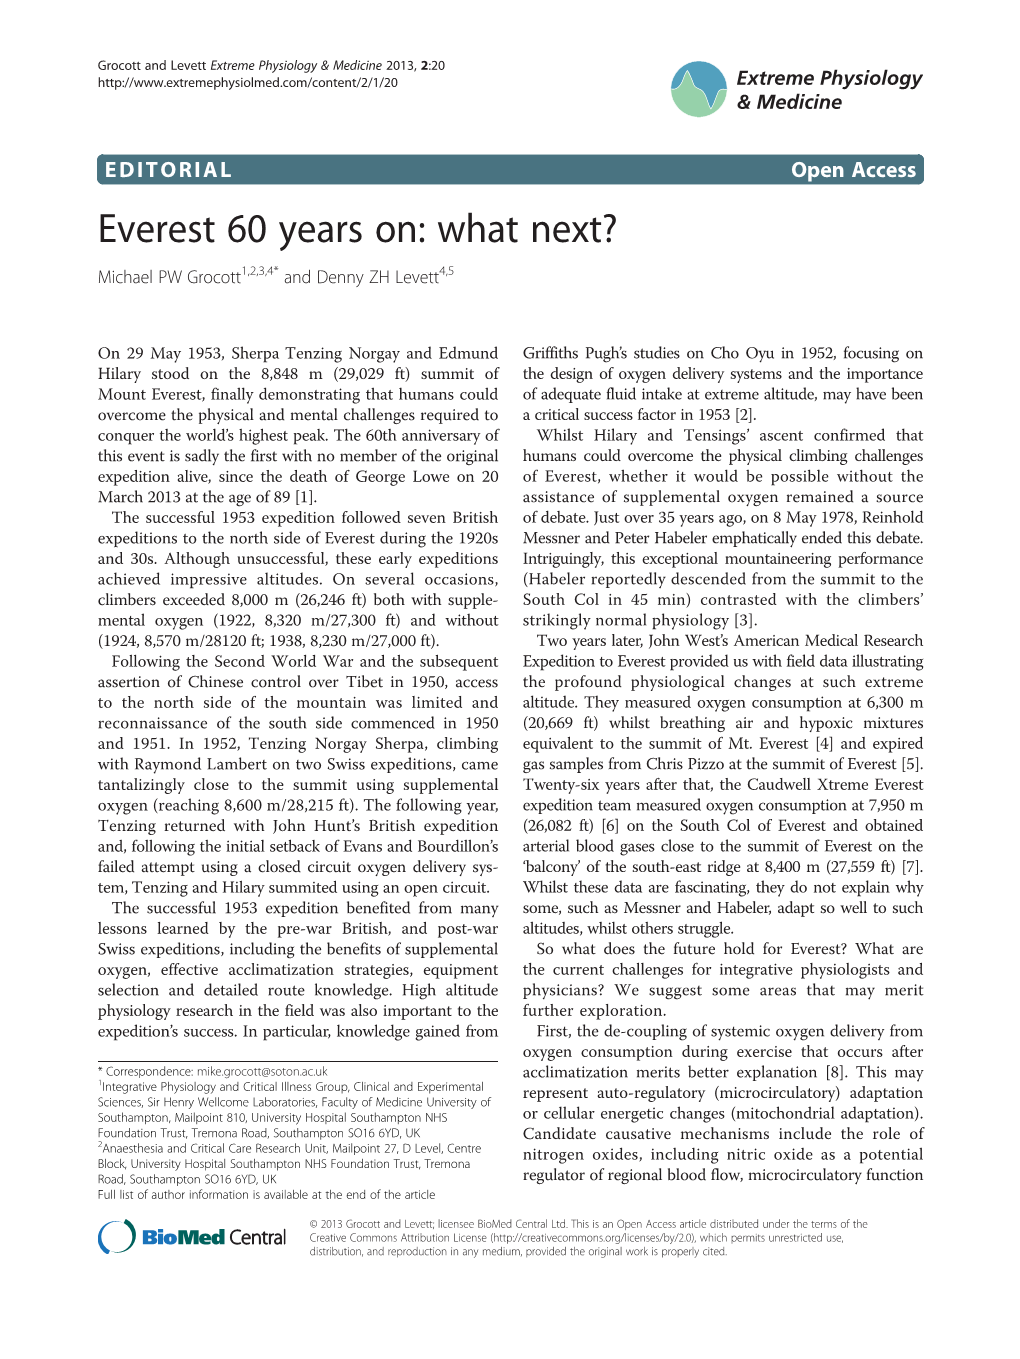 Everest 60 Years On: What Next? Michael PW Grocott1,2,3,4* and Denny ZH Levett4,5